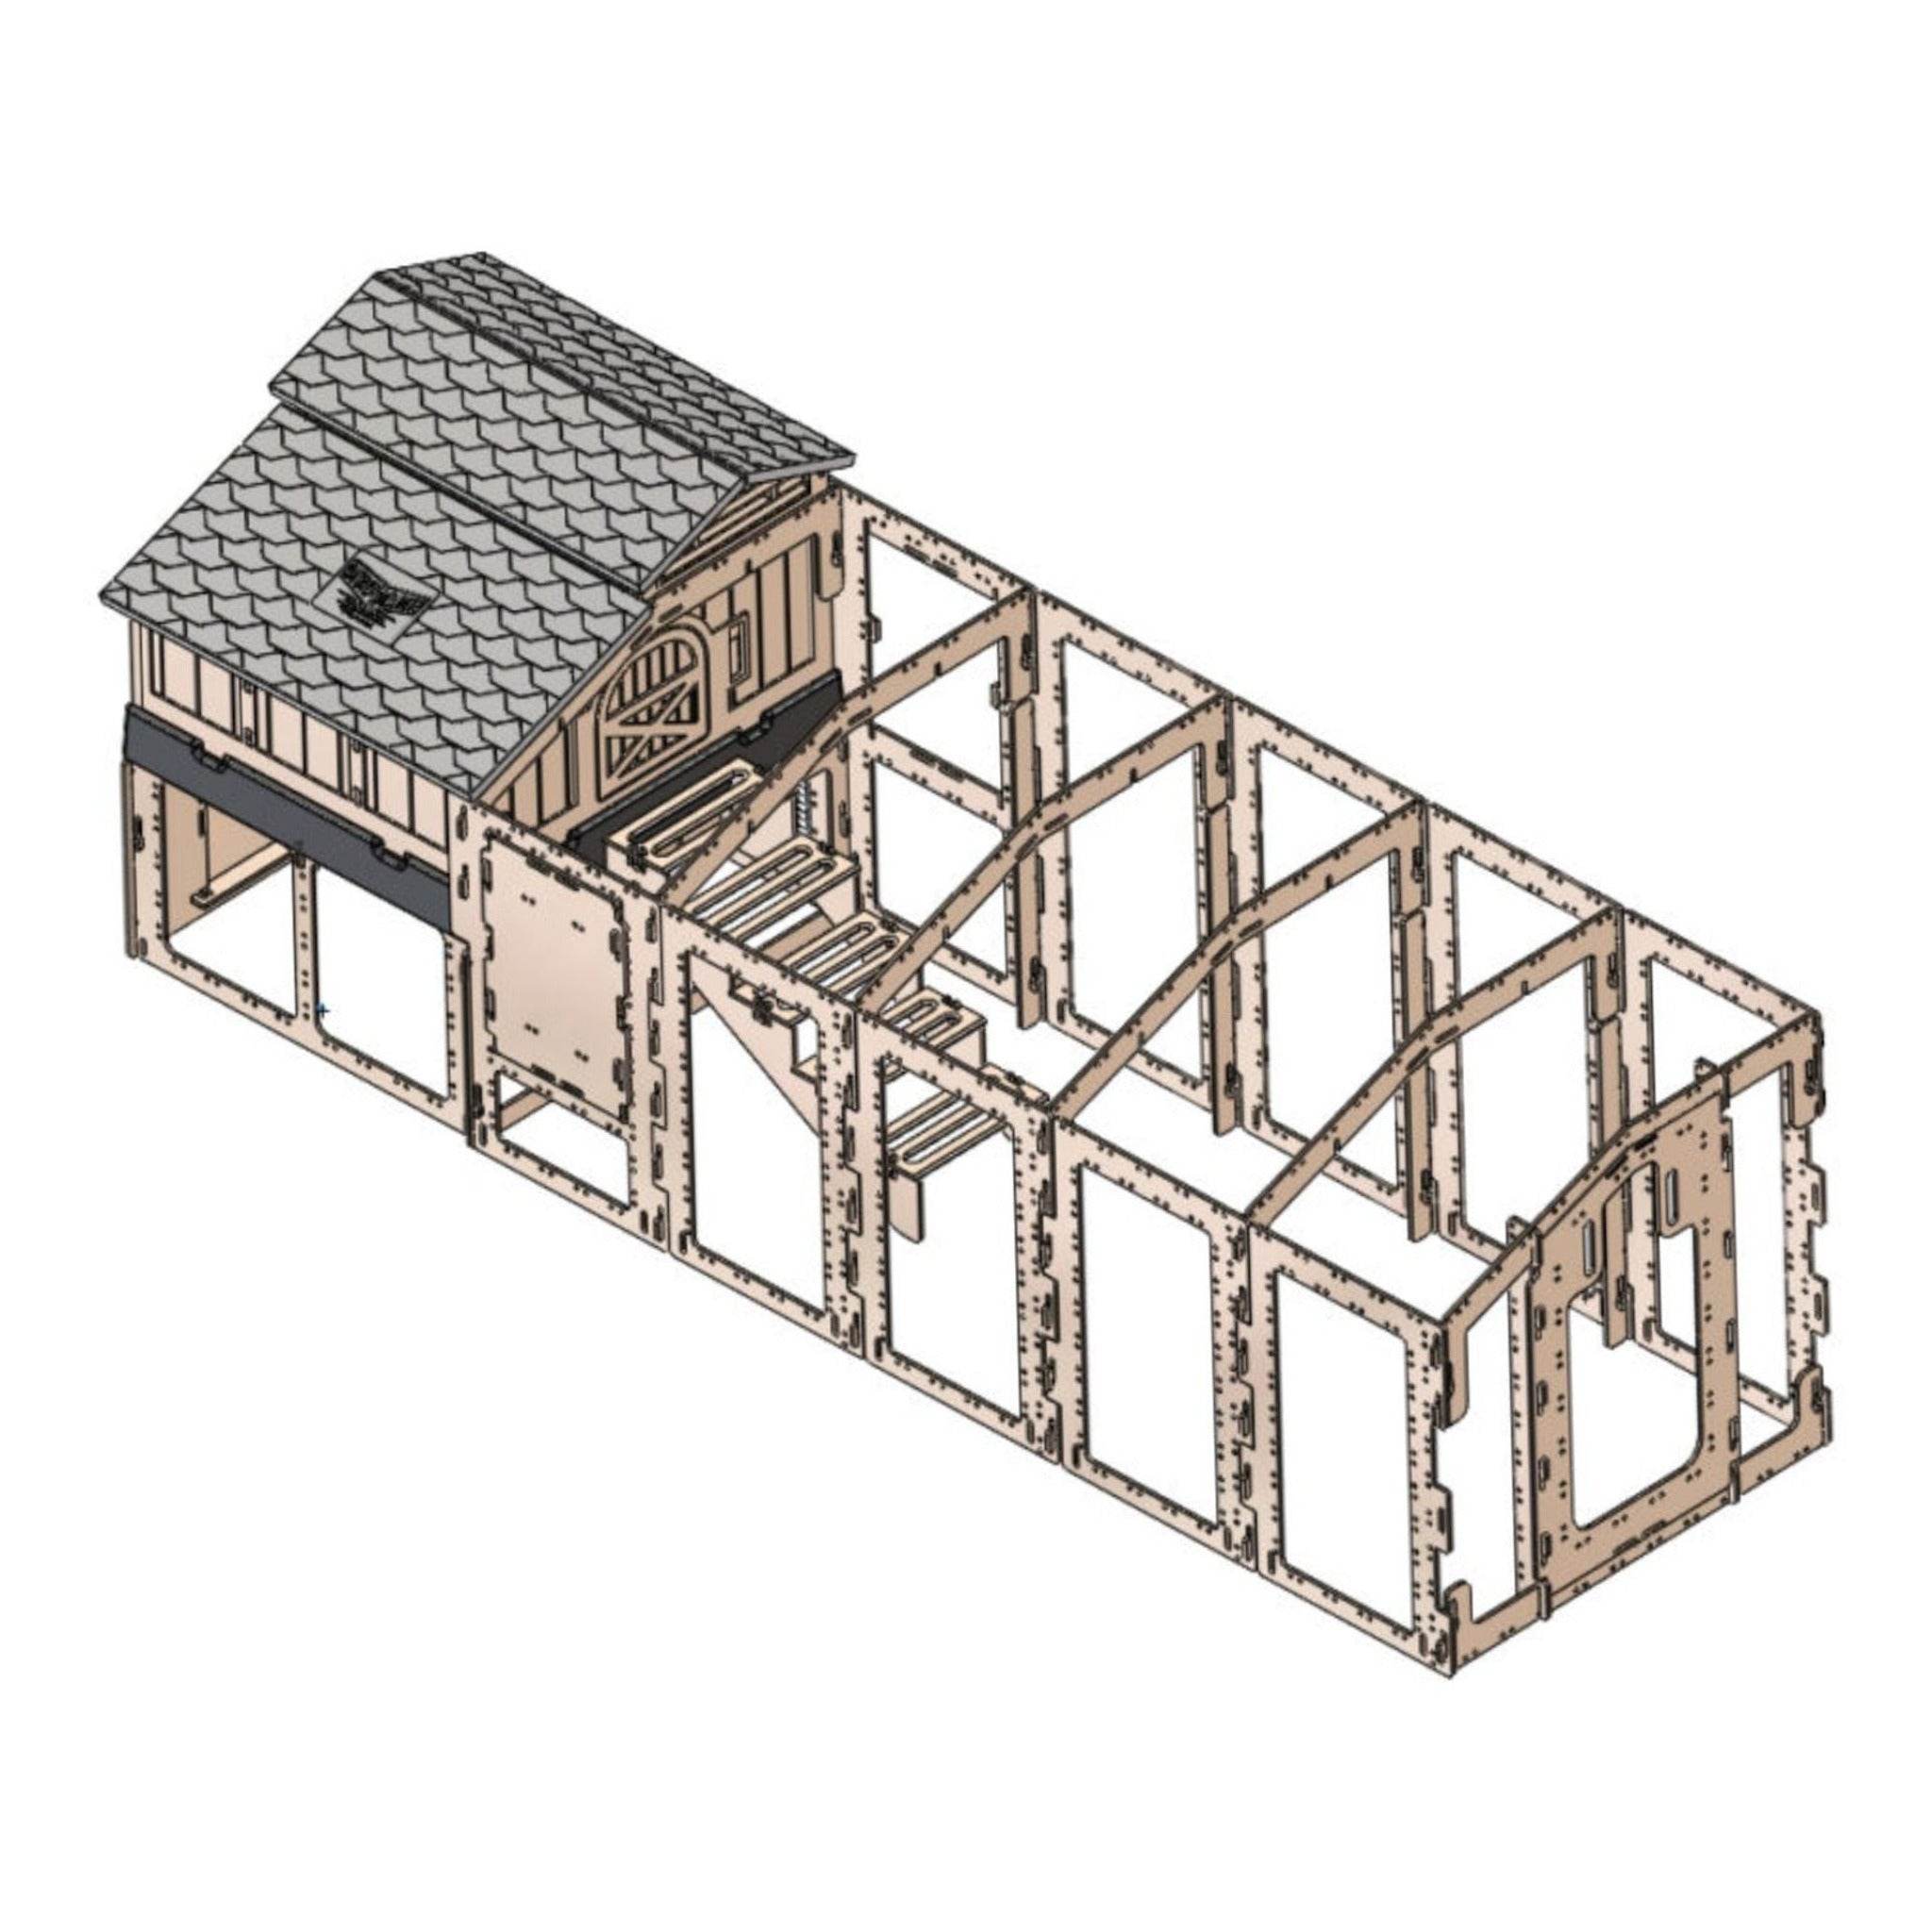 Hatching Time 3D rendering of Standard Formex Chicken coop extension kit. Kit shows longer chicken coop run and chicken coop on top of stand and stairs addition. Without chicken wire